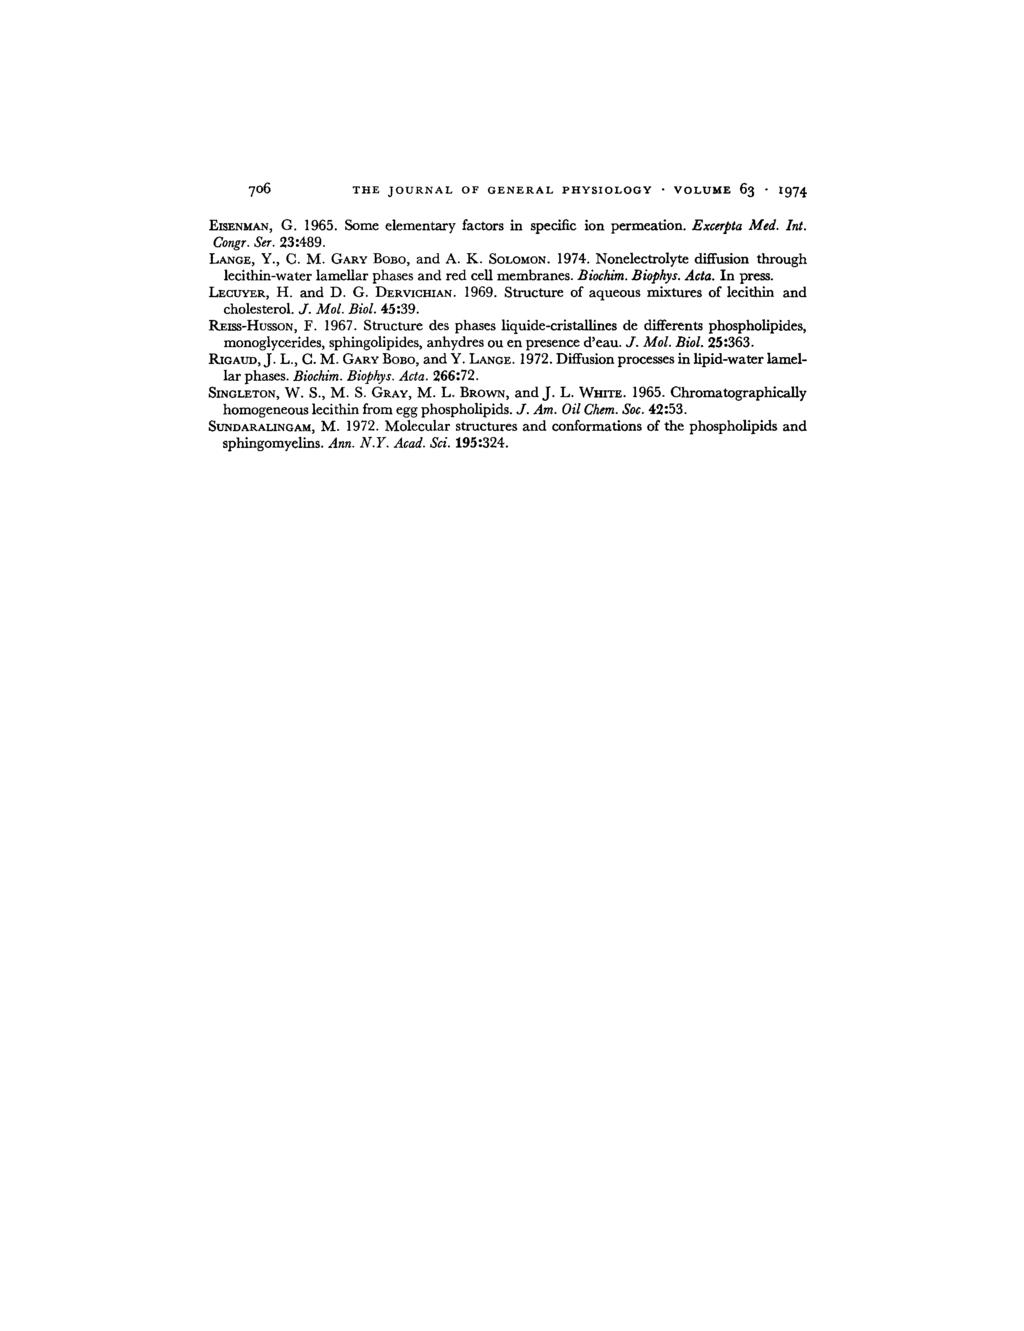 706 THE JOURNAL OF GENERAL PHYSIOLOGY VOLUME 63 974 G. 1965. Some elementary factors in specific ion permeation. Excerpta Med. Int. EISENMAN, Congr. Ser. 23:489. LANGE, Y., C. M. GARY BOBO, and A. K.